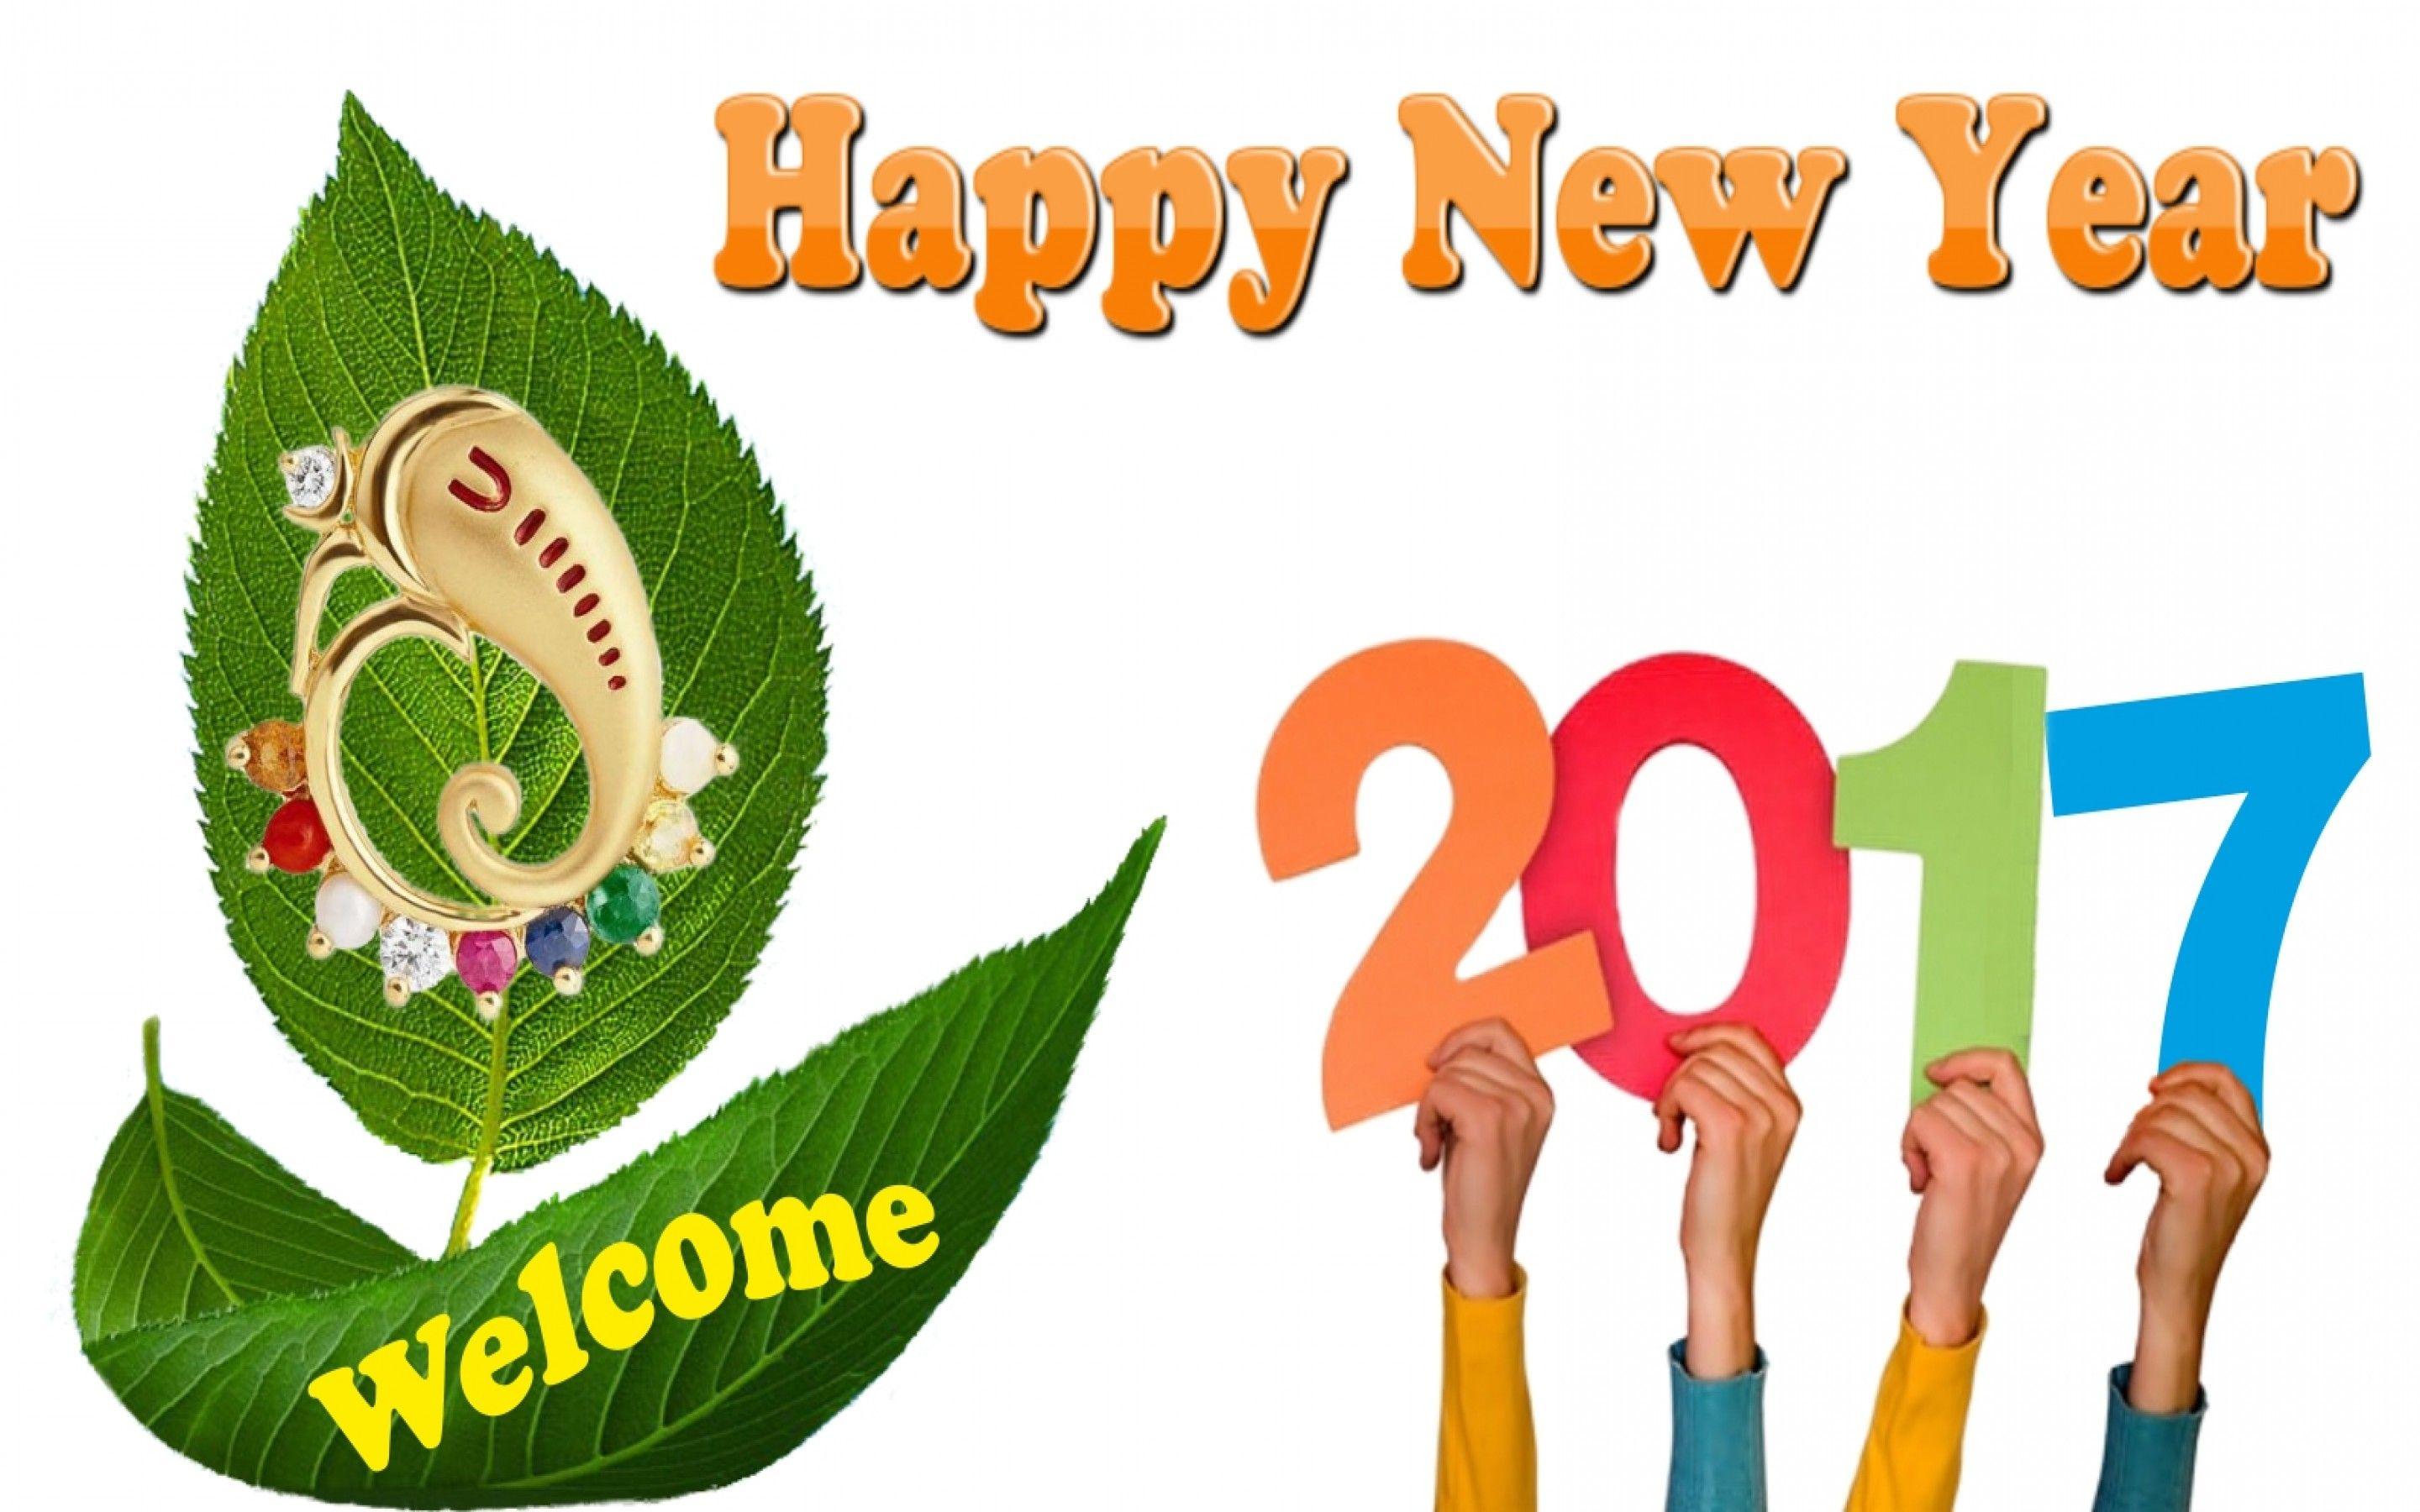 Happy New Year 2017 Image New Year 2017